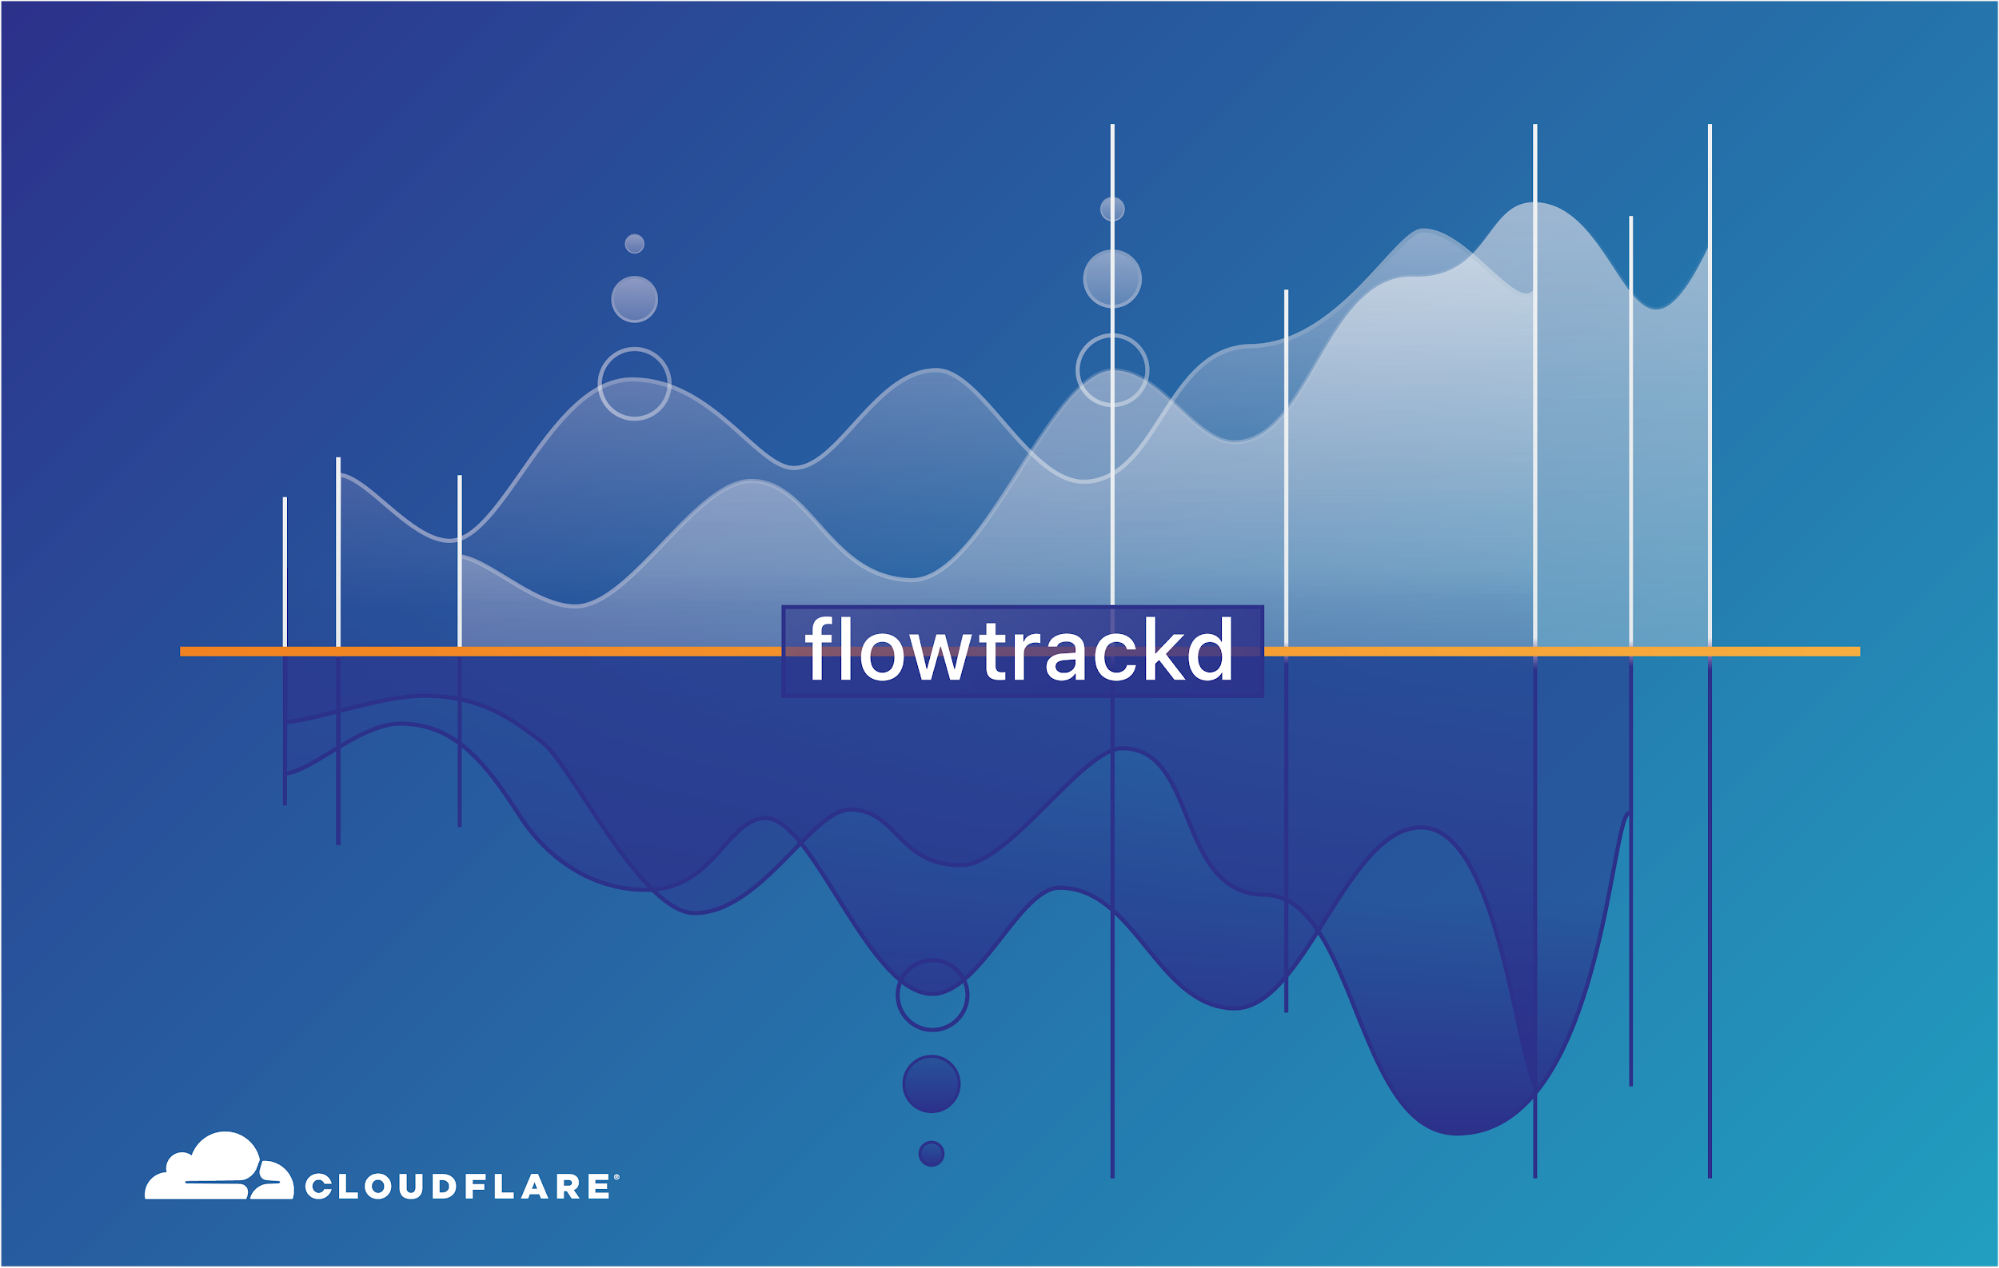 flowtrackd: DDoS Protection with Unidirectional TCP Flow Tracking